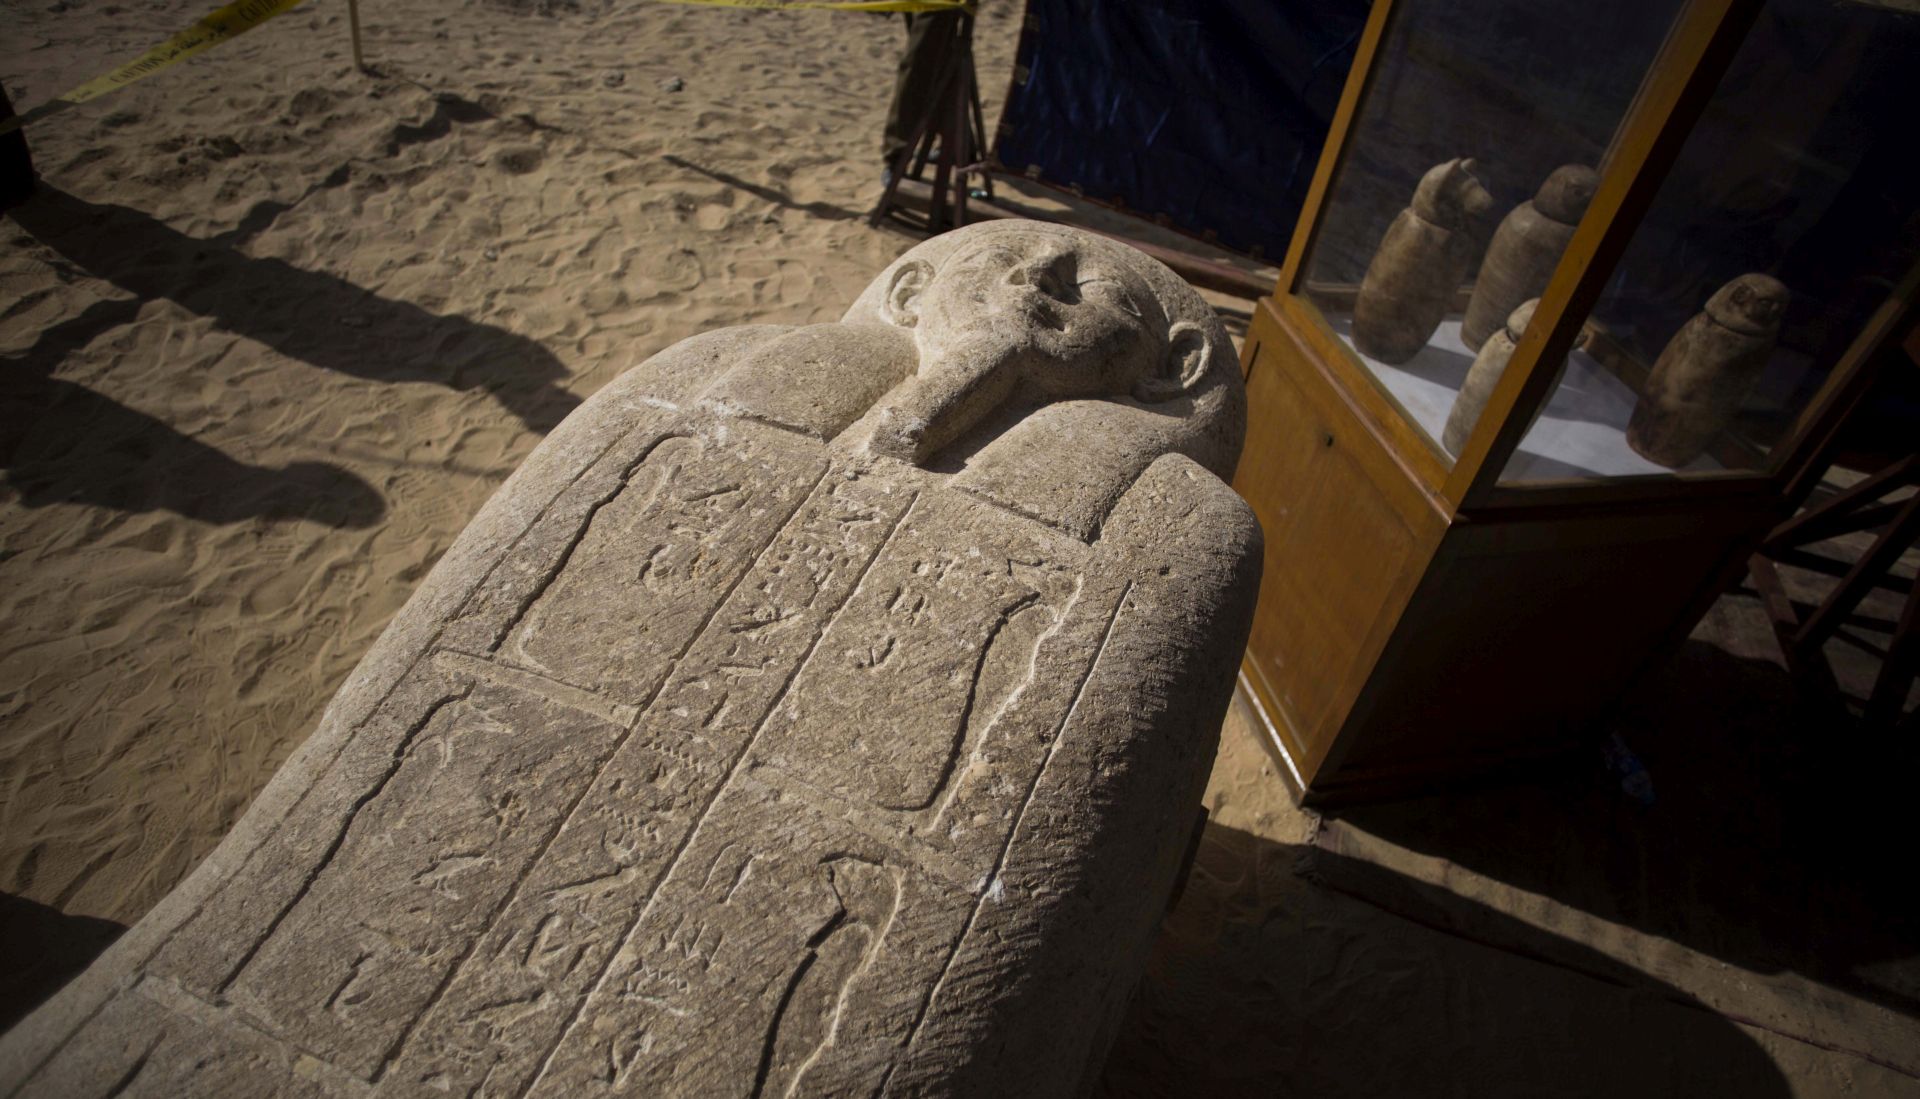 epa06560941 A sarcophagus that was discovered is displayed at the site of an ancient Egyptian cemetery, in Minya province, 245 km south of Cairo, Egypt, 24 February 2018. According to the Ministry of Antiquities, an ancient Egyptian cemetery was discovered six kilometers north of Tuna al-Gabal archaeological site in Minya, containing a number of burial shafts dating to the late pharaonic period and early Ptolemaic era. The archaeological mission unearthed a mummy decorated with a bronze collar, 1000 figurines, some 40 sarcophagi, four canopic jars, and other funerary items.  EPA/IBRAHIM YOUSSEF